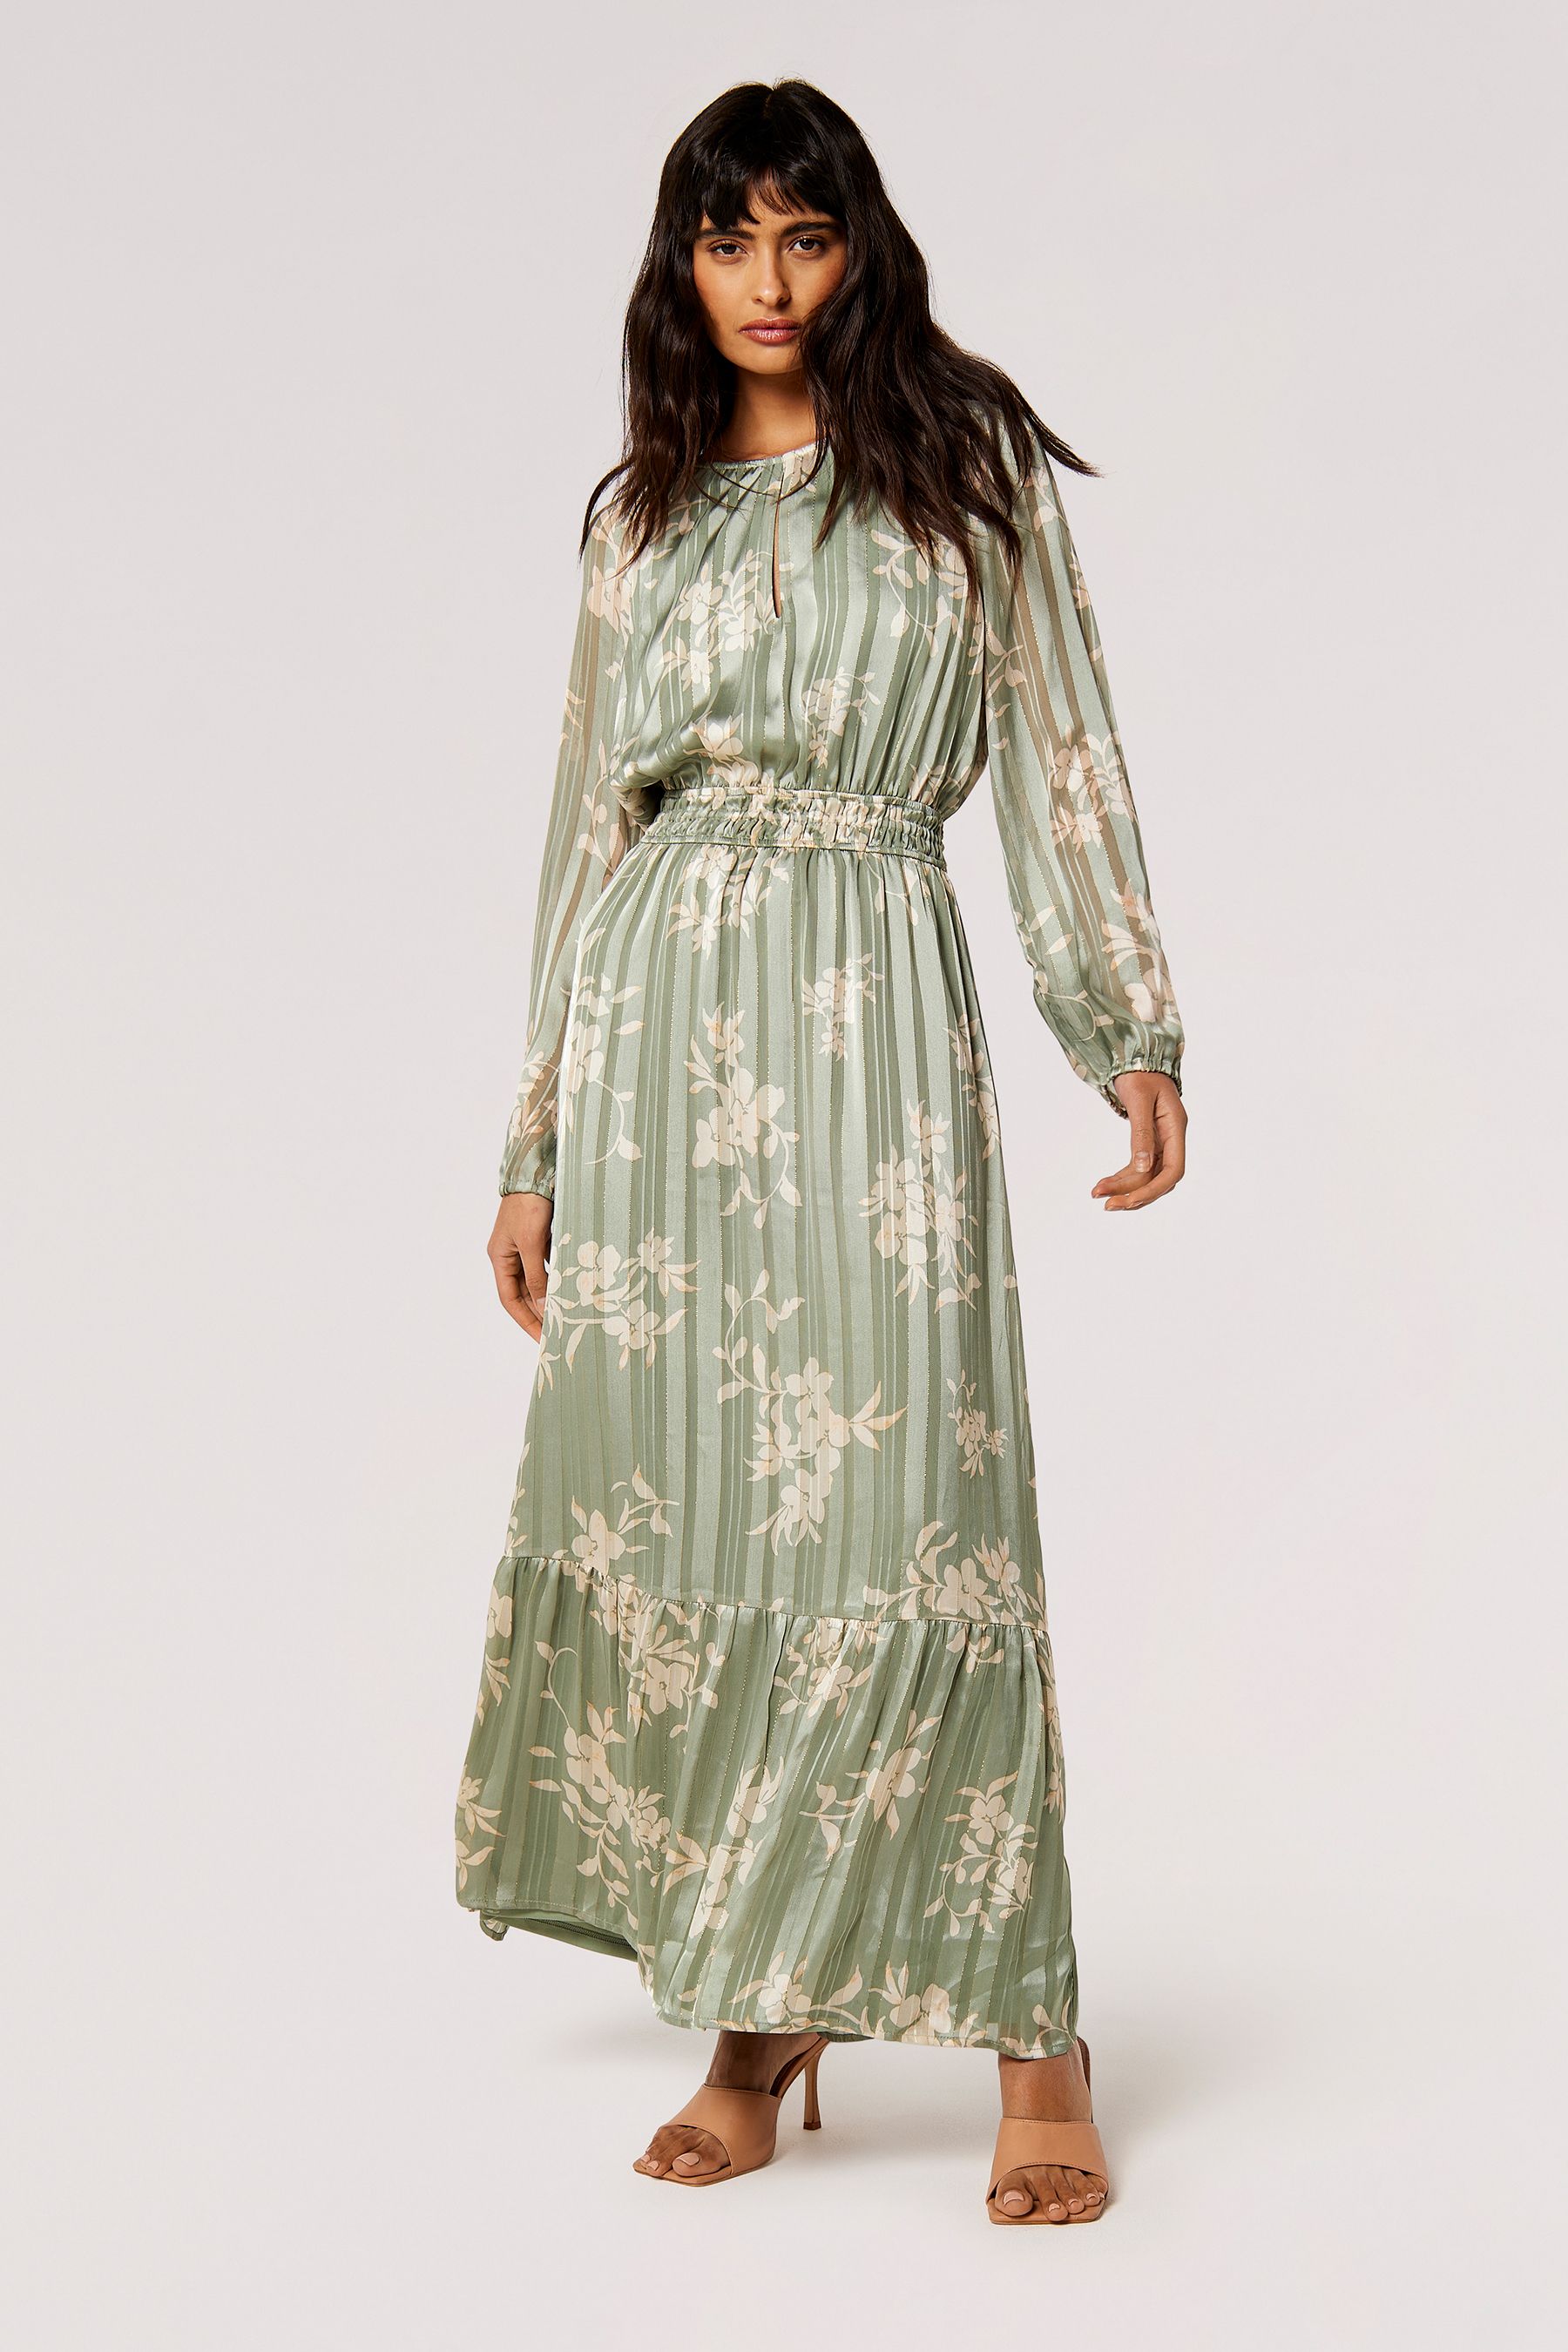 Buy Apricot Green Silhouette Floral Satin Shimmer Maxi Dress from the ...